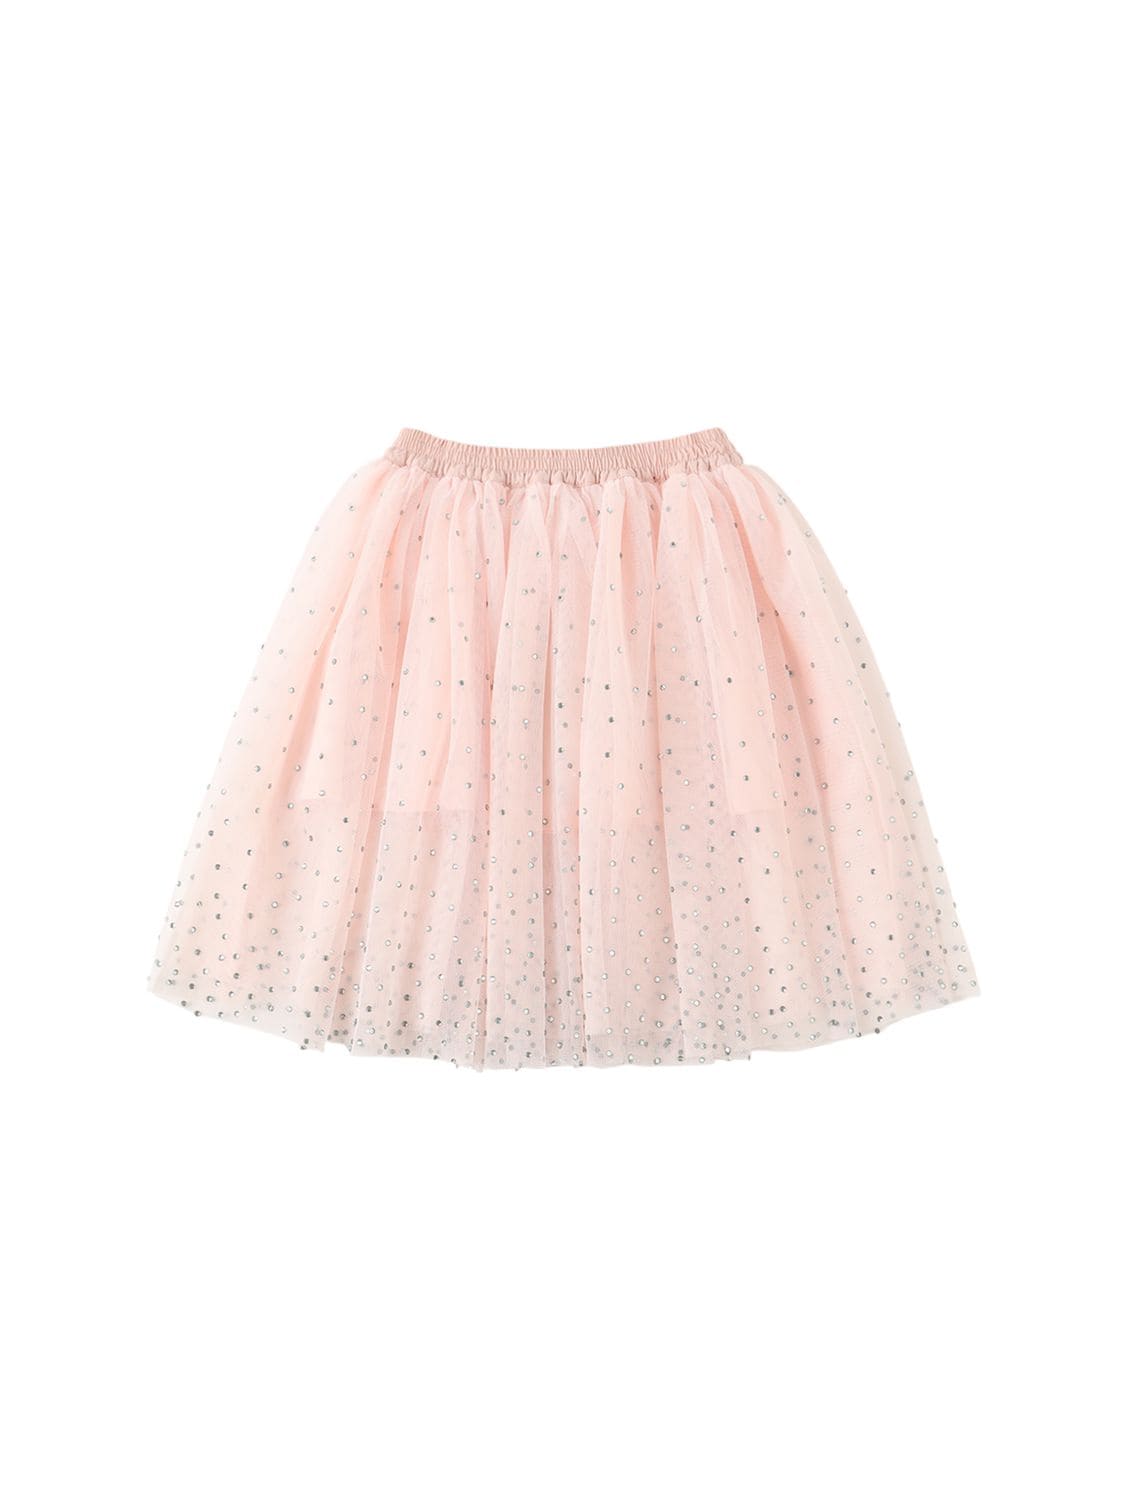 Stella Mccartney Kids' Embellished Recycled Tulle Mini Skirt In Pink